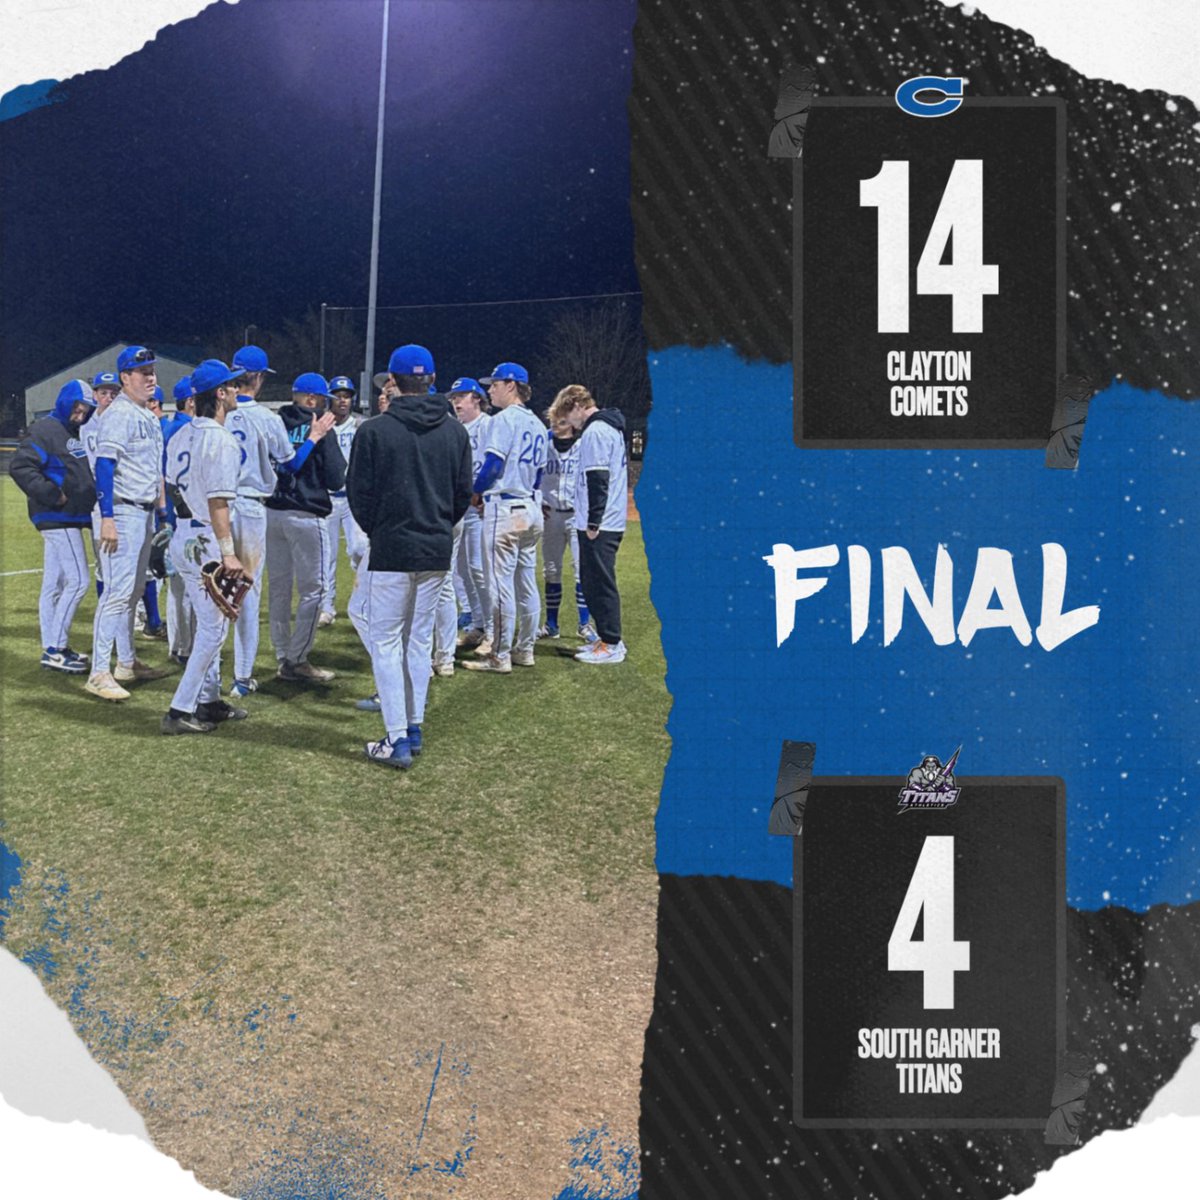 Congratulations to our Baseball team for a solid 14-4 win tonight over South Garner at Pleasant Field! Timely hitting and base running led to a big win in 6 innings. The boys return to action on Friday afternoon at South Garner! #GoComets